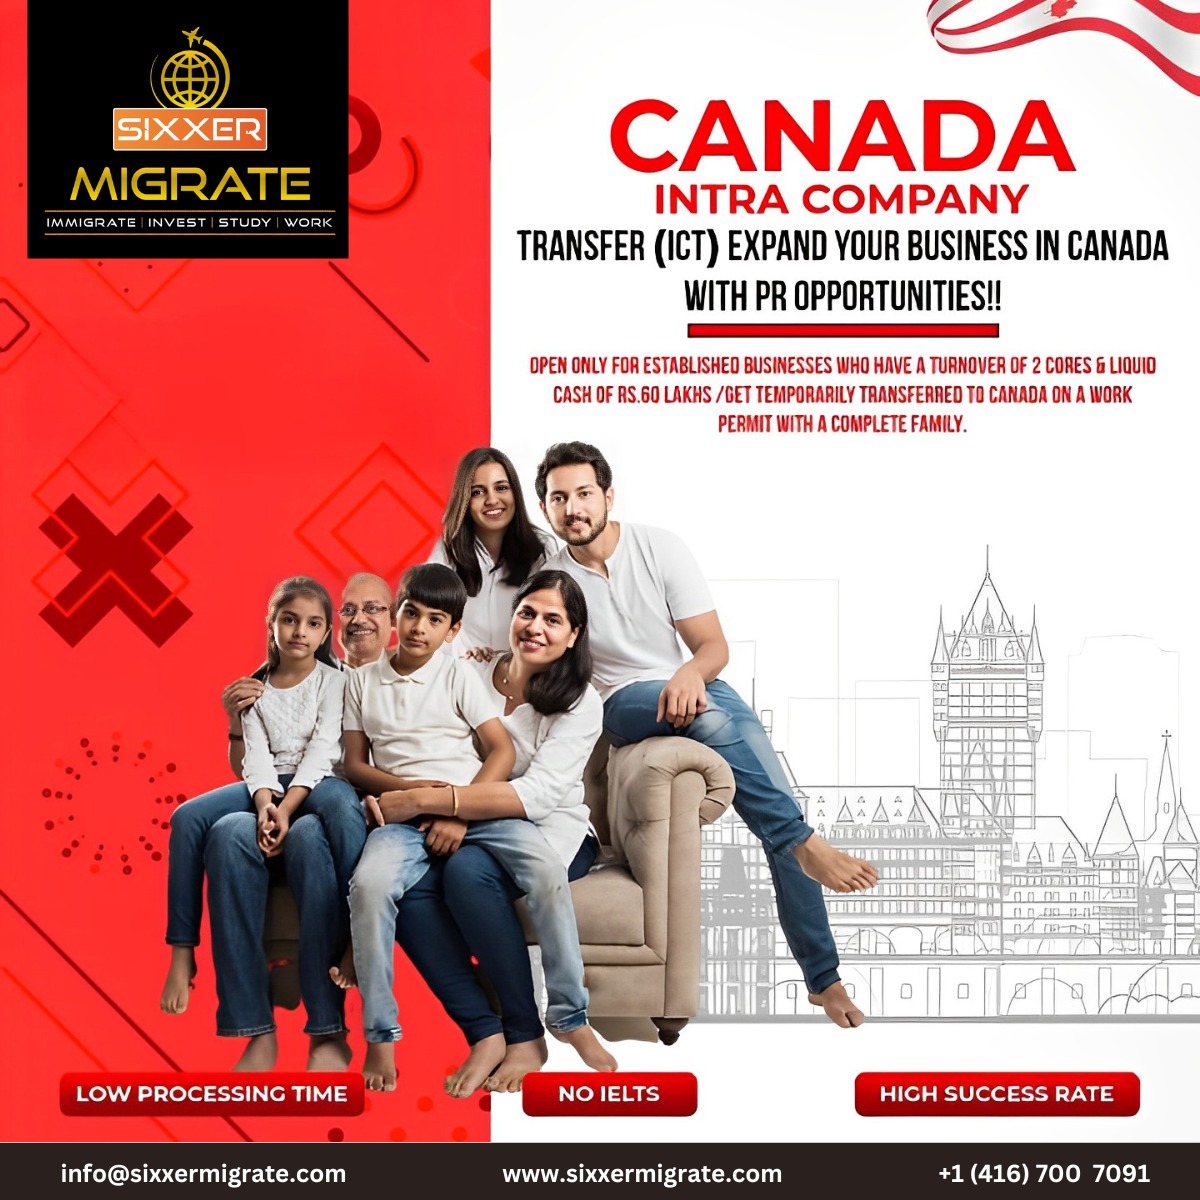 📷📷 Building Global Bridges: Canada's Intra-Company Transfer Program 📷📷
Ready to expand your horizons and take your career to new heights? Look no further! For more information, visit us at sixxermigrate.com
#canada #canadapr #canadavisa #PRServices #PRServices